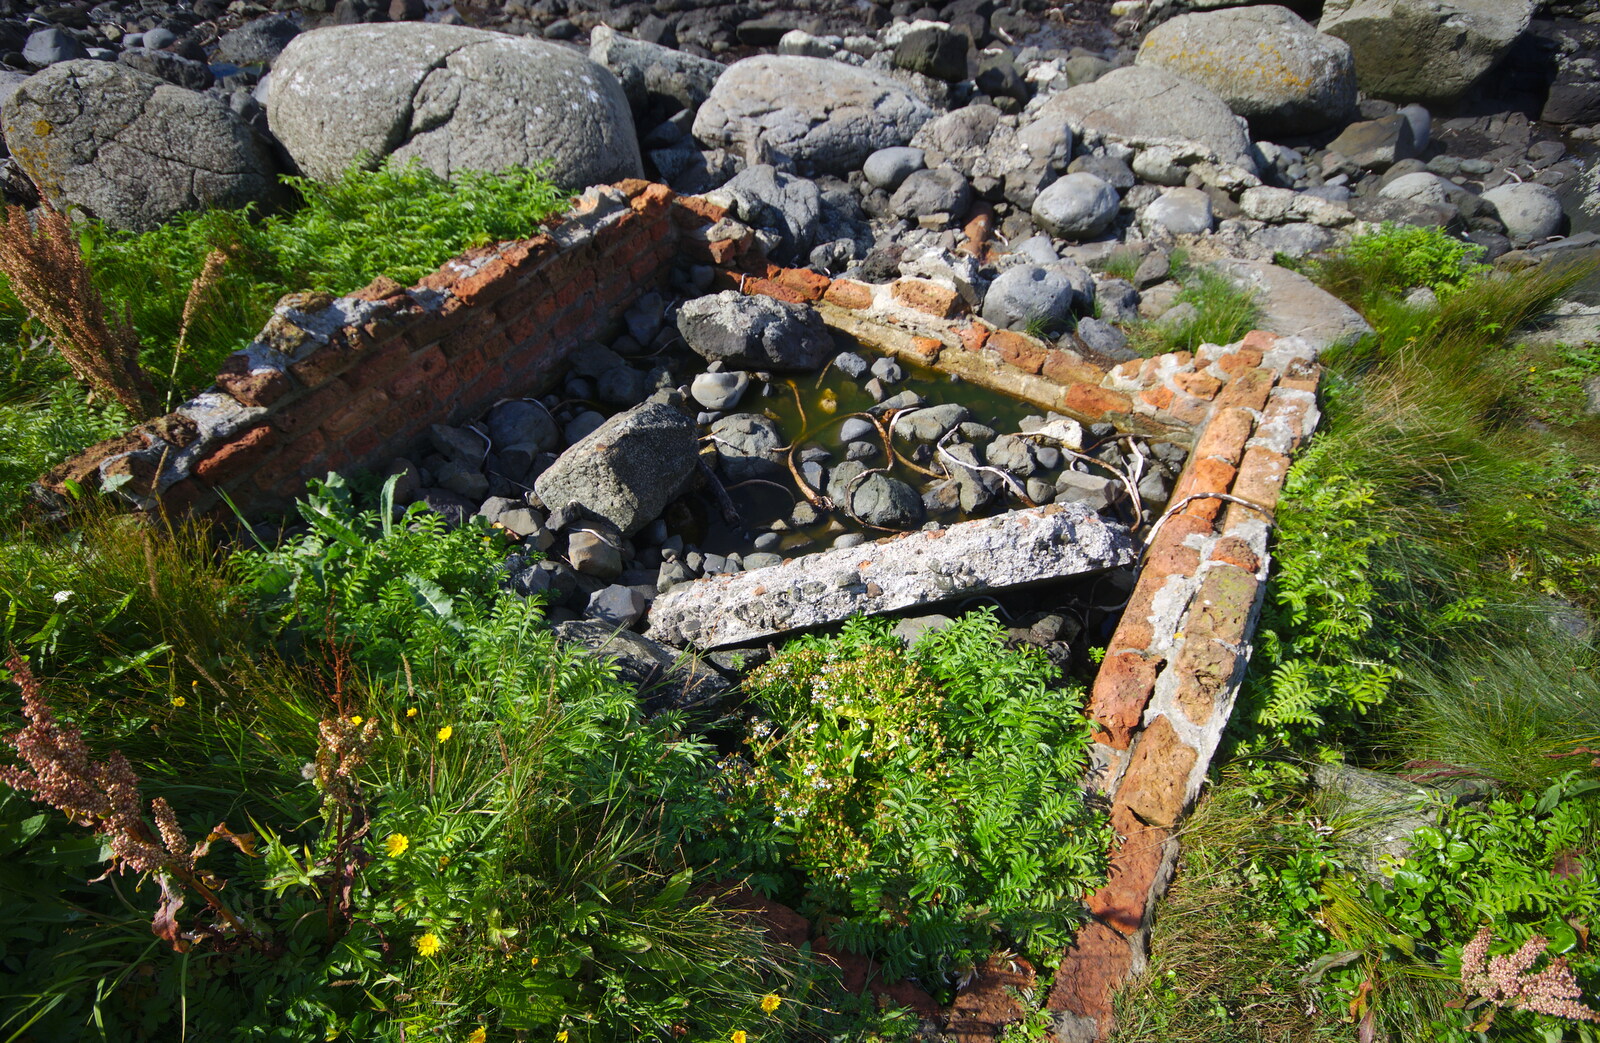 Some abandoned brickwork from The Giant's Causeway, Bushmills, County Antrim, Northern Ireland - 14th August 2019